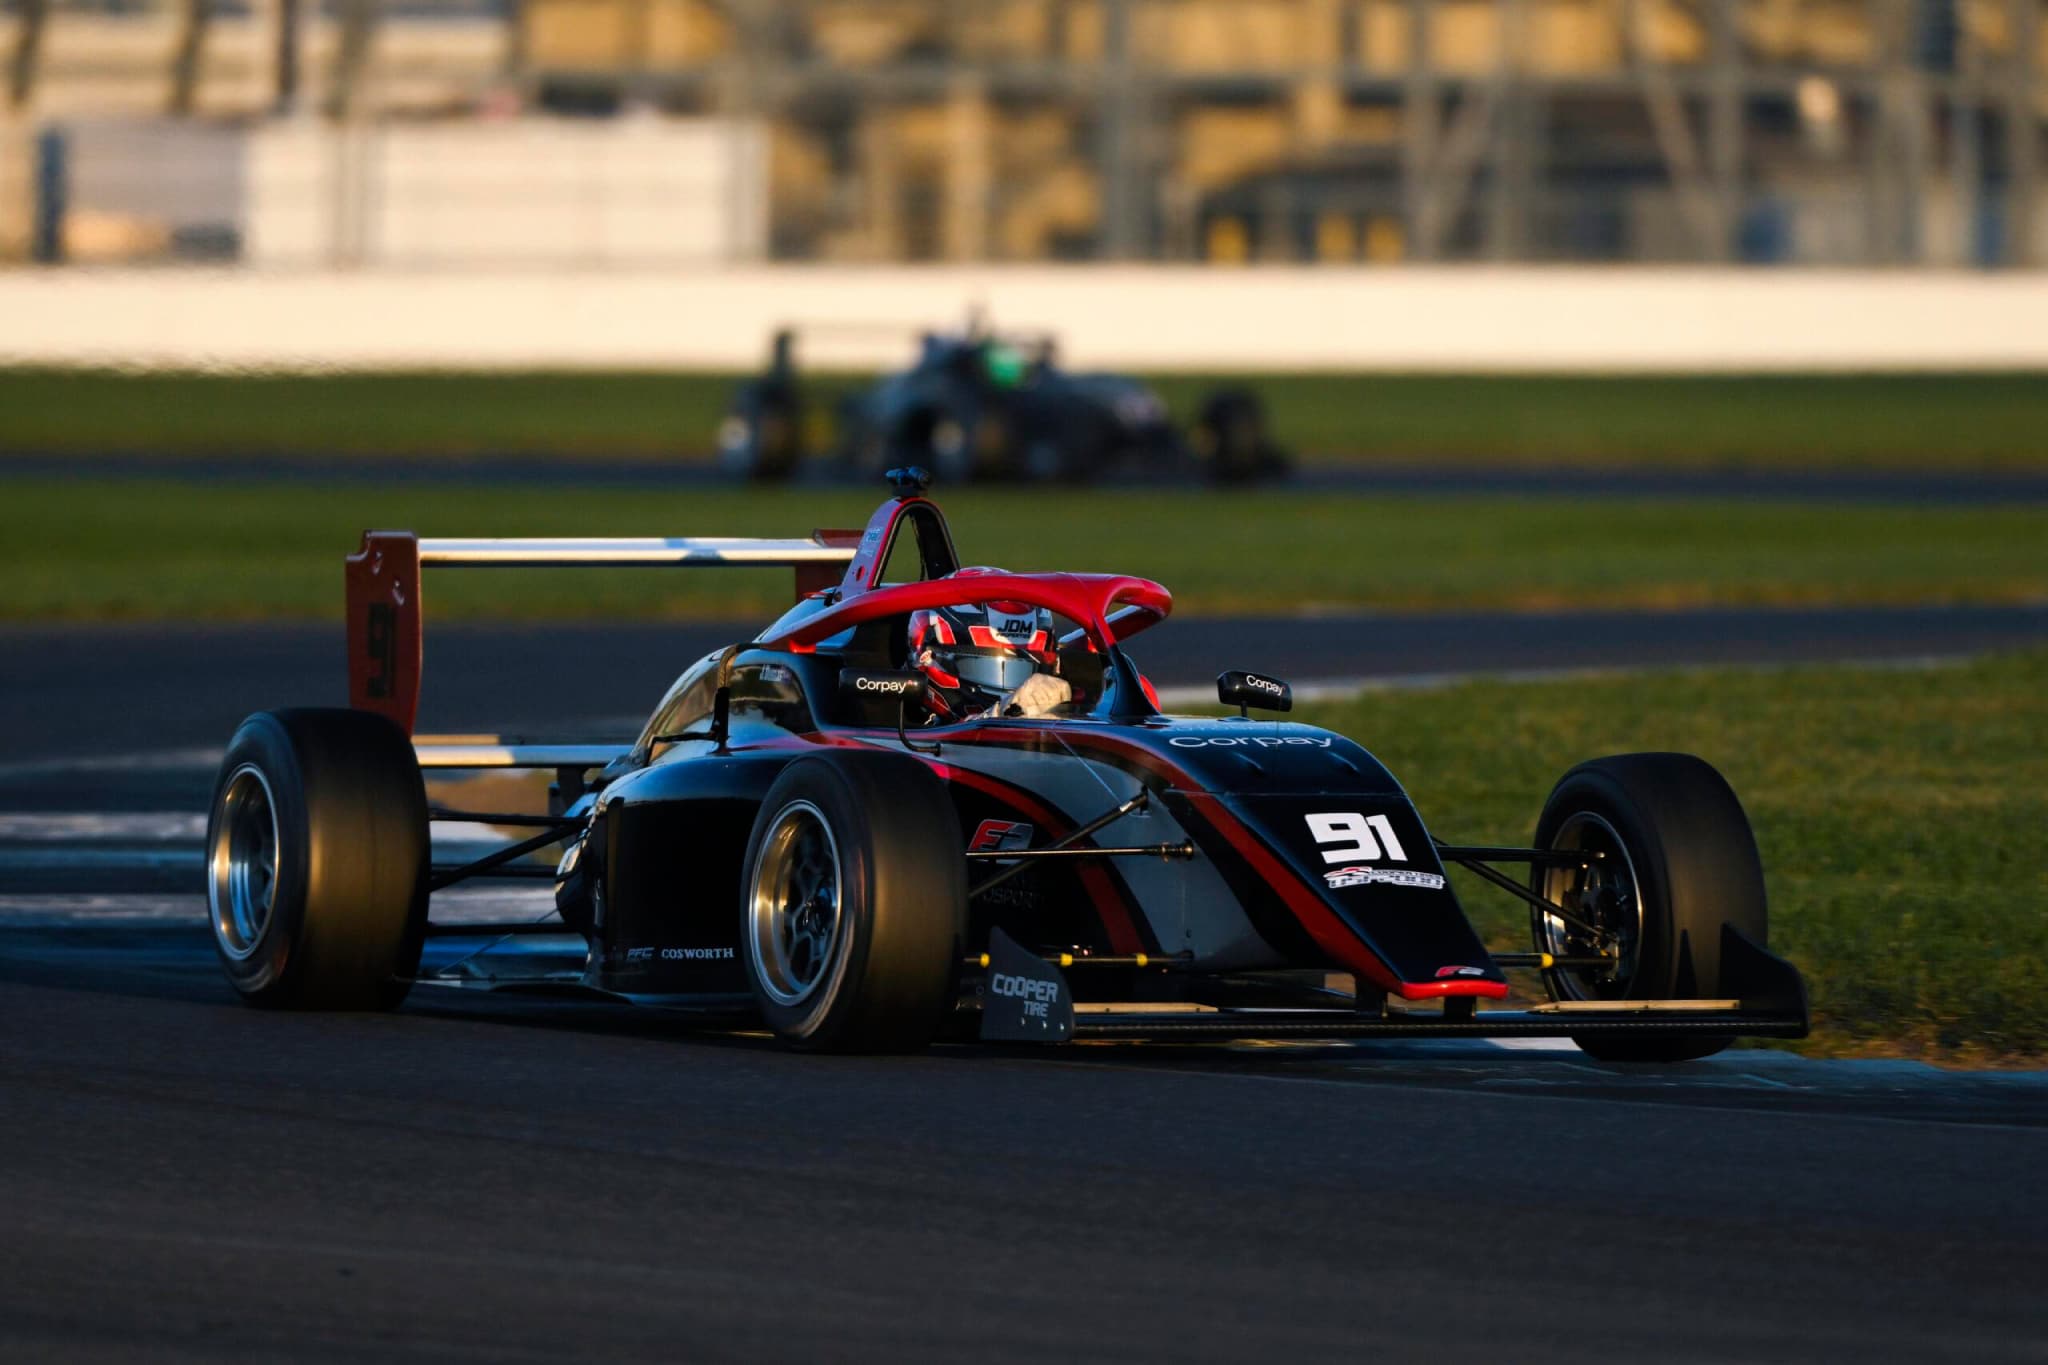 Jacob Douglas confident looking forward to the 2023 USF2000 season in America